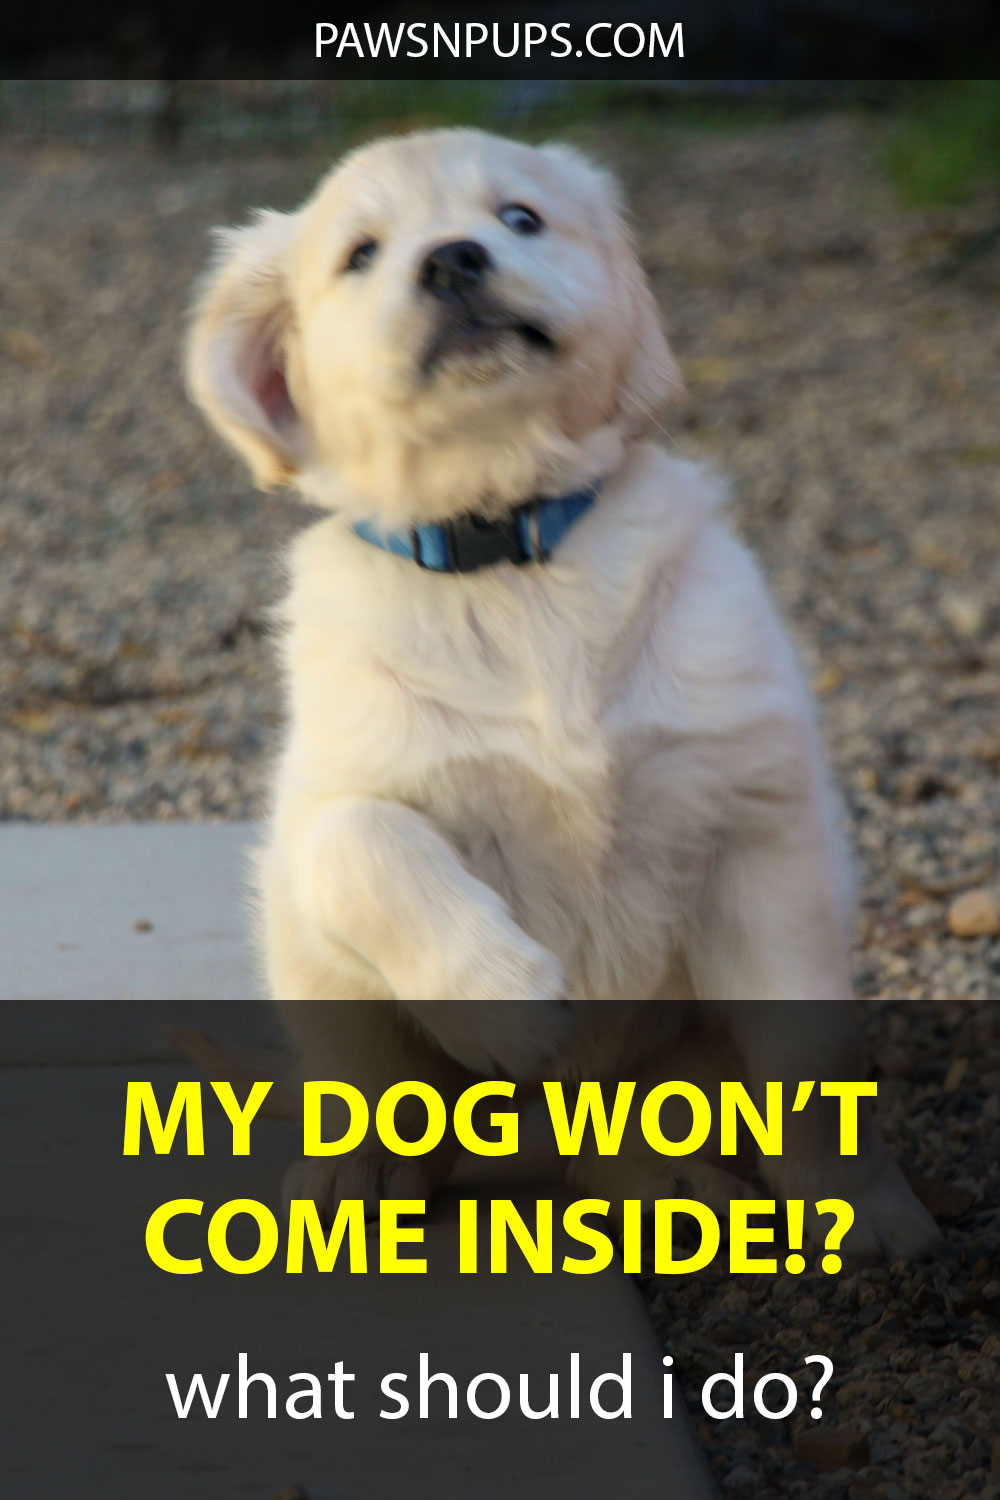 My Dog Won't Come Inside!? What Should I Do? - Golden Retriever puppy looks like he's backing away from something.